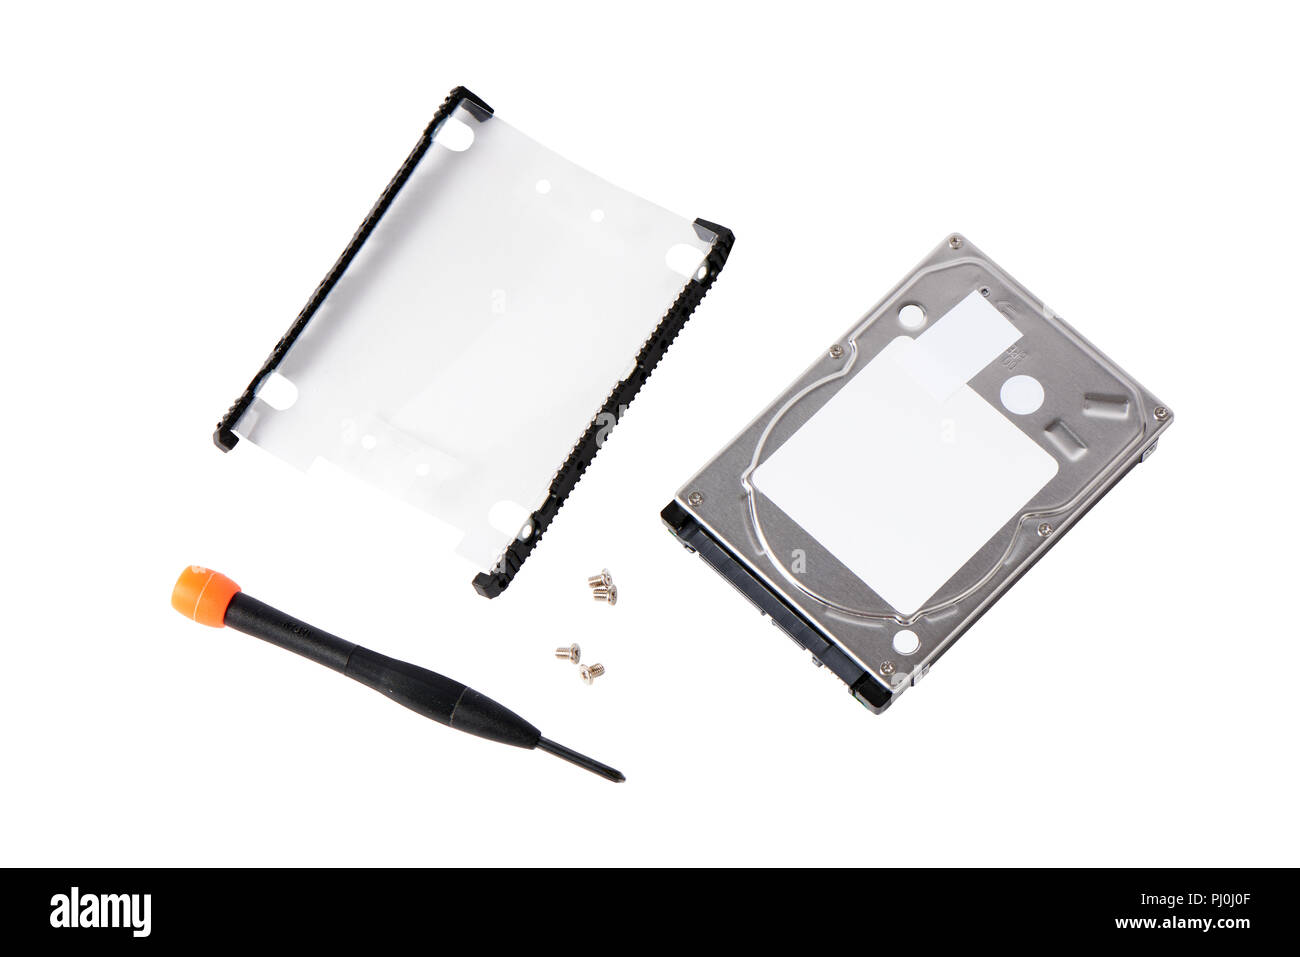 Hard disk drive aseembly bracket kit and HDD for laptop on a white background Stock Photo